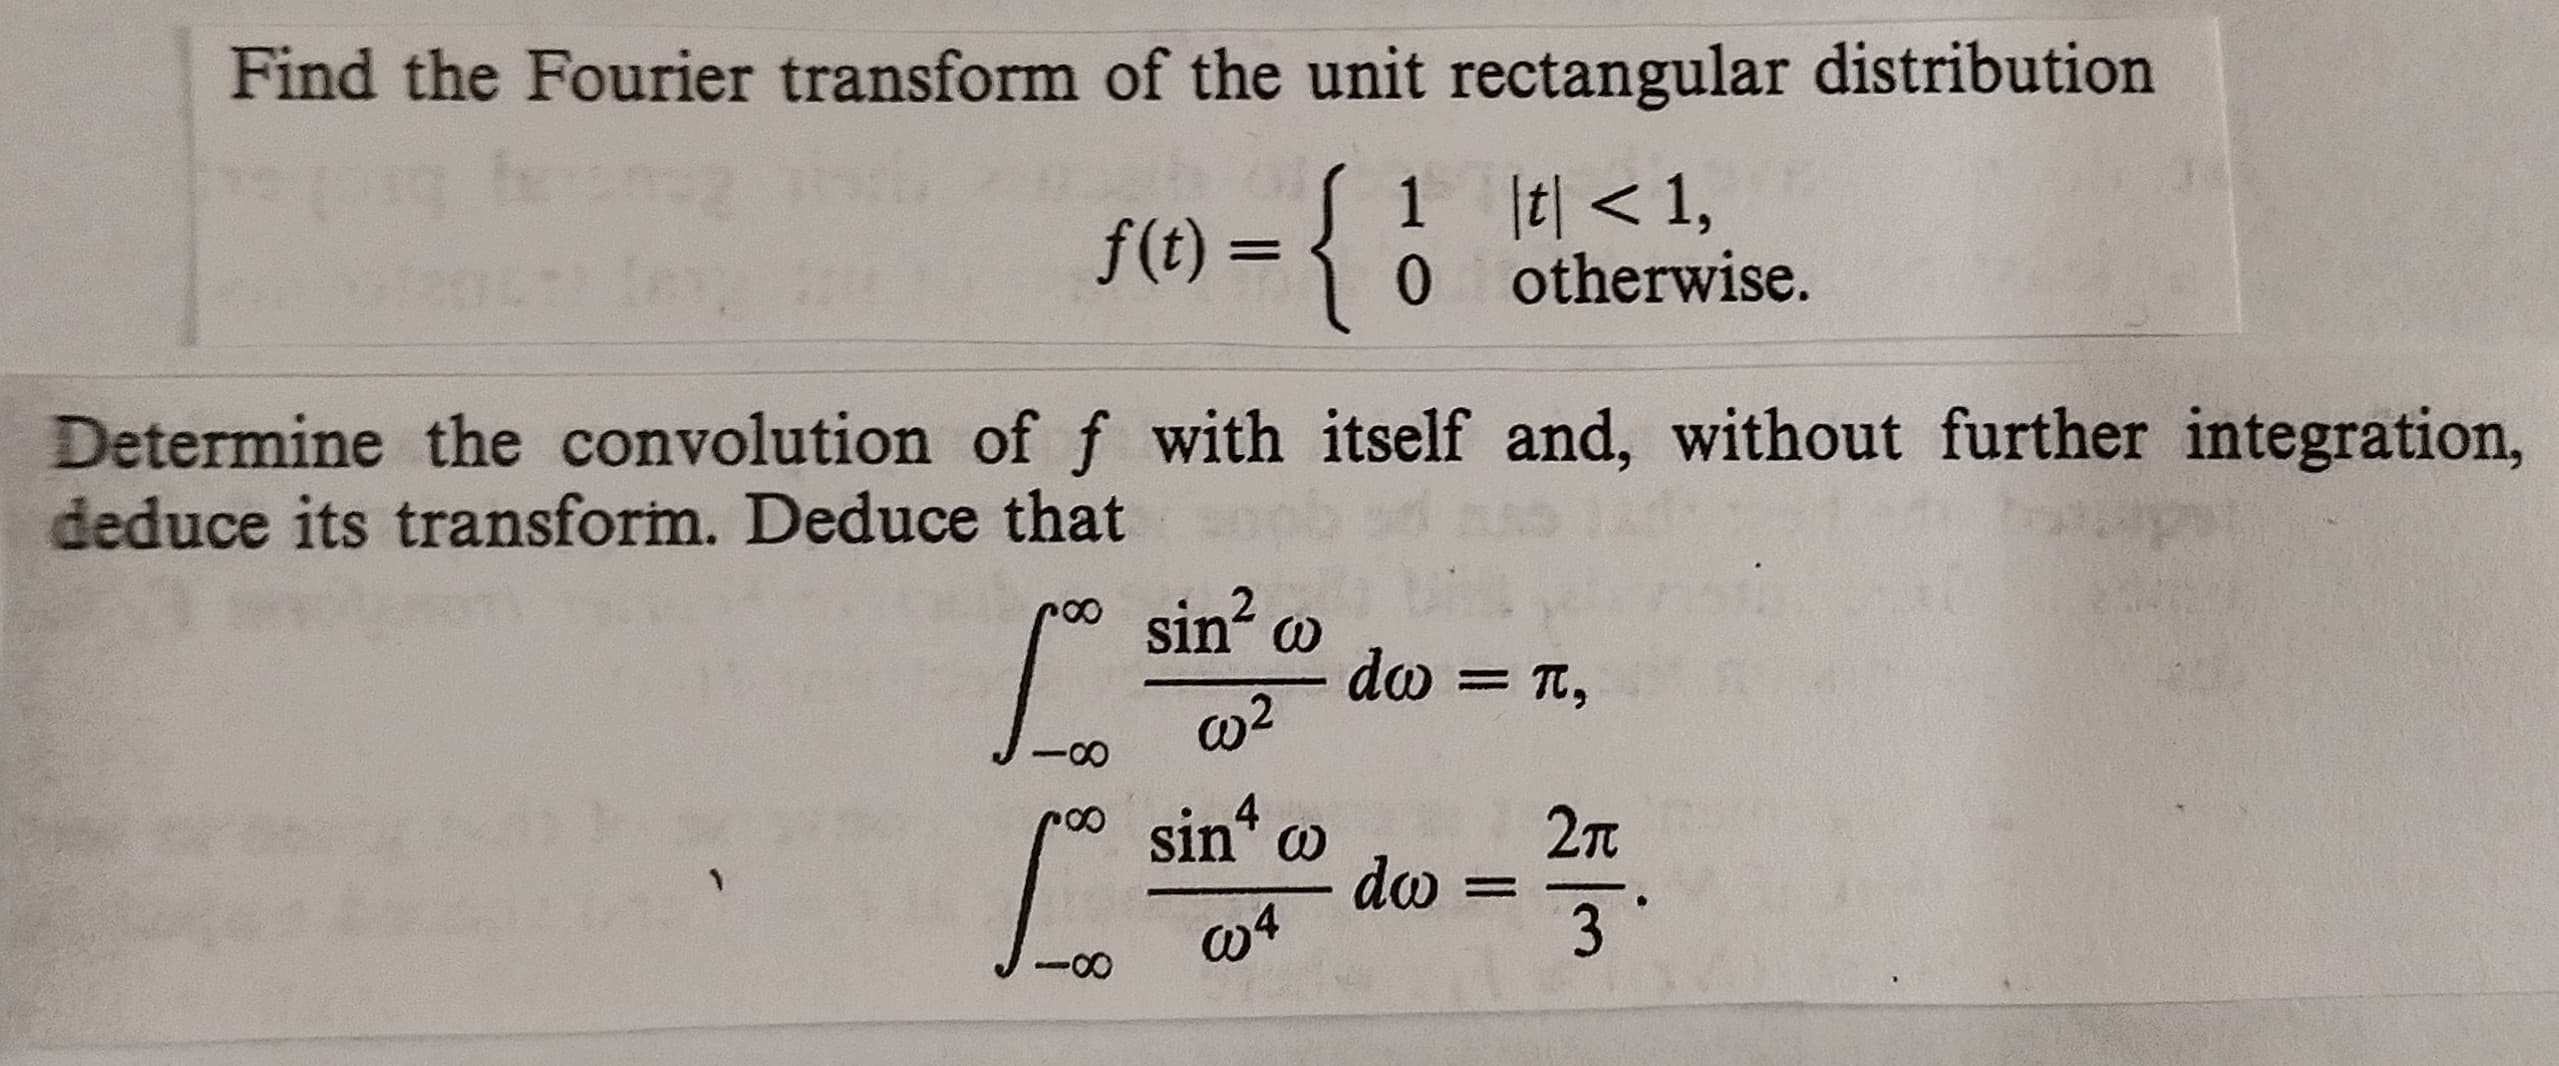 Find the Fourier transform of the unit rectangular distribution
f(t) o otherwise.
Determine the convolution of f with itself and, without further integration,
deduce its transform. Deduce that
sin2 ω
sin4 ω
2π
do-
